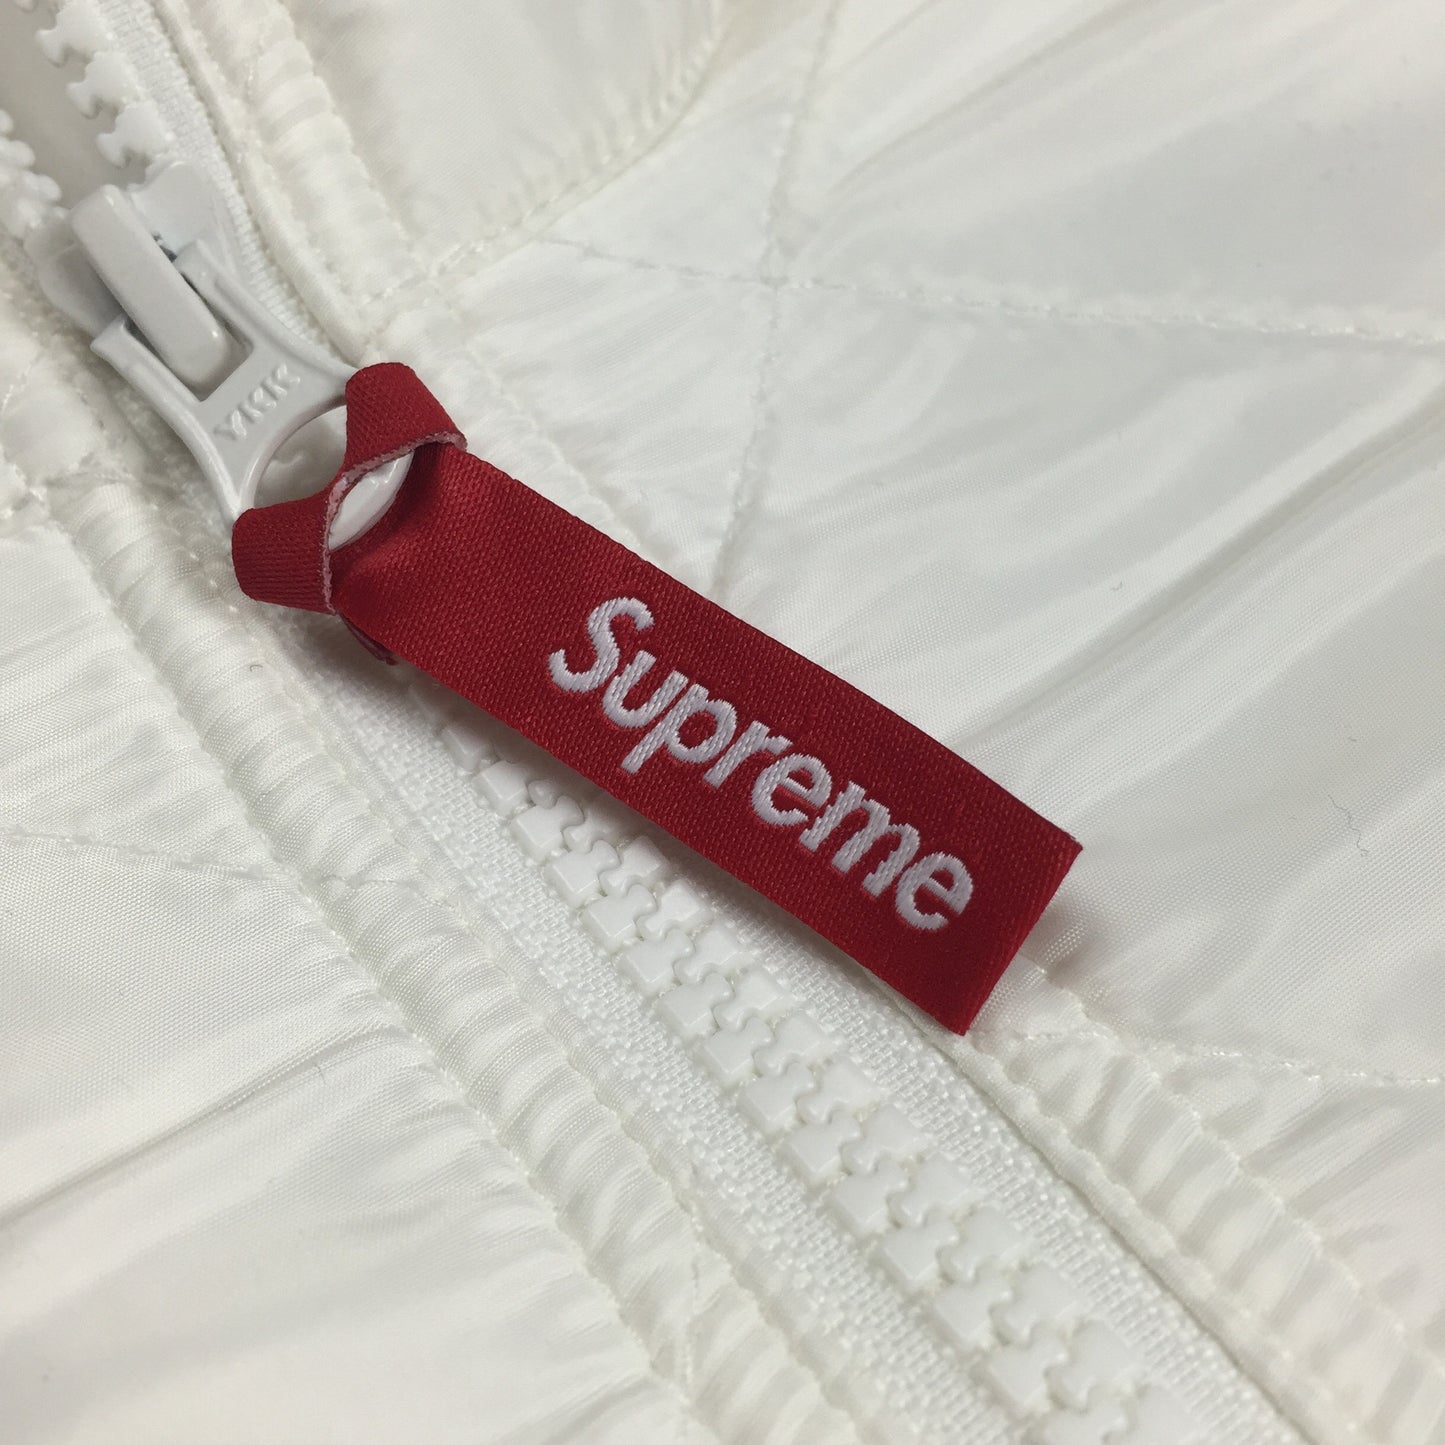 Supreme - White Quilted Arc Logo Pullover